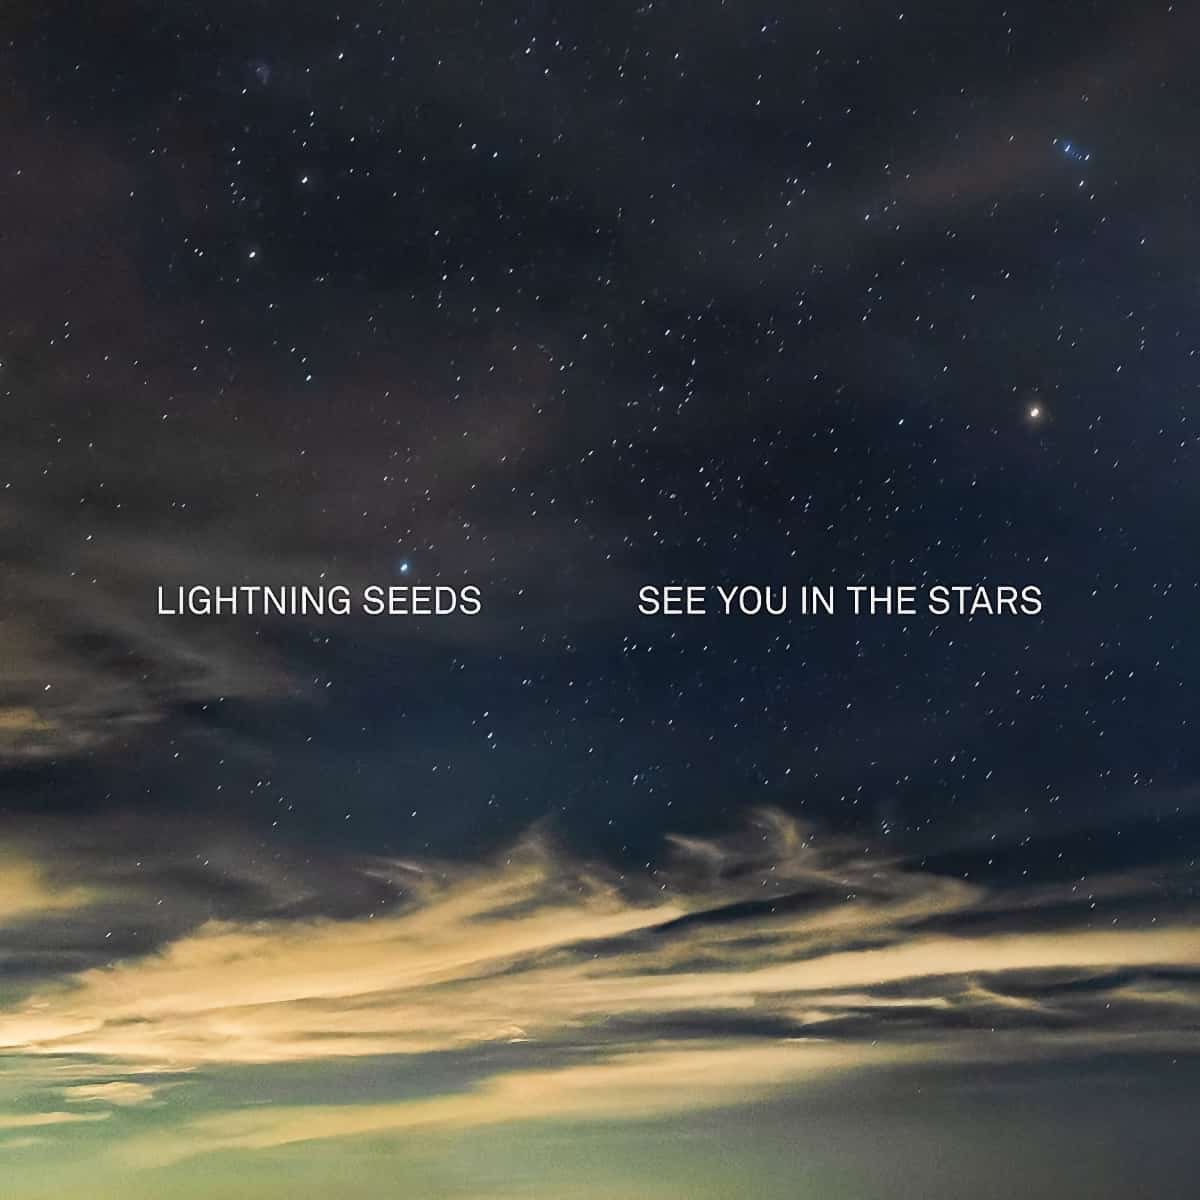 Wishing our very good friend @IanZBroudie all the luck in the world with @Lightning_Seeds new album ‘See You In The Stars’ our today ✊🏻